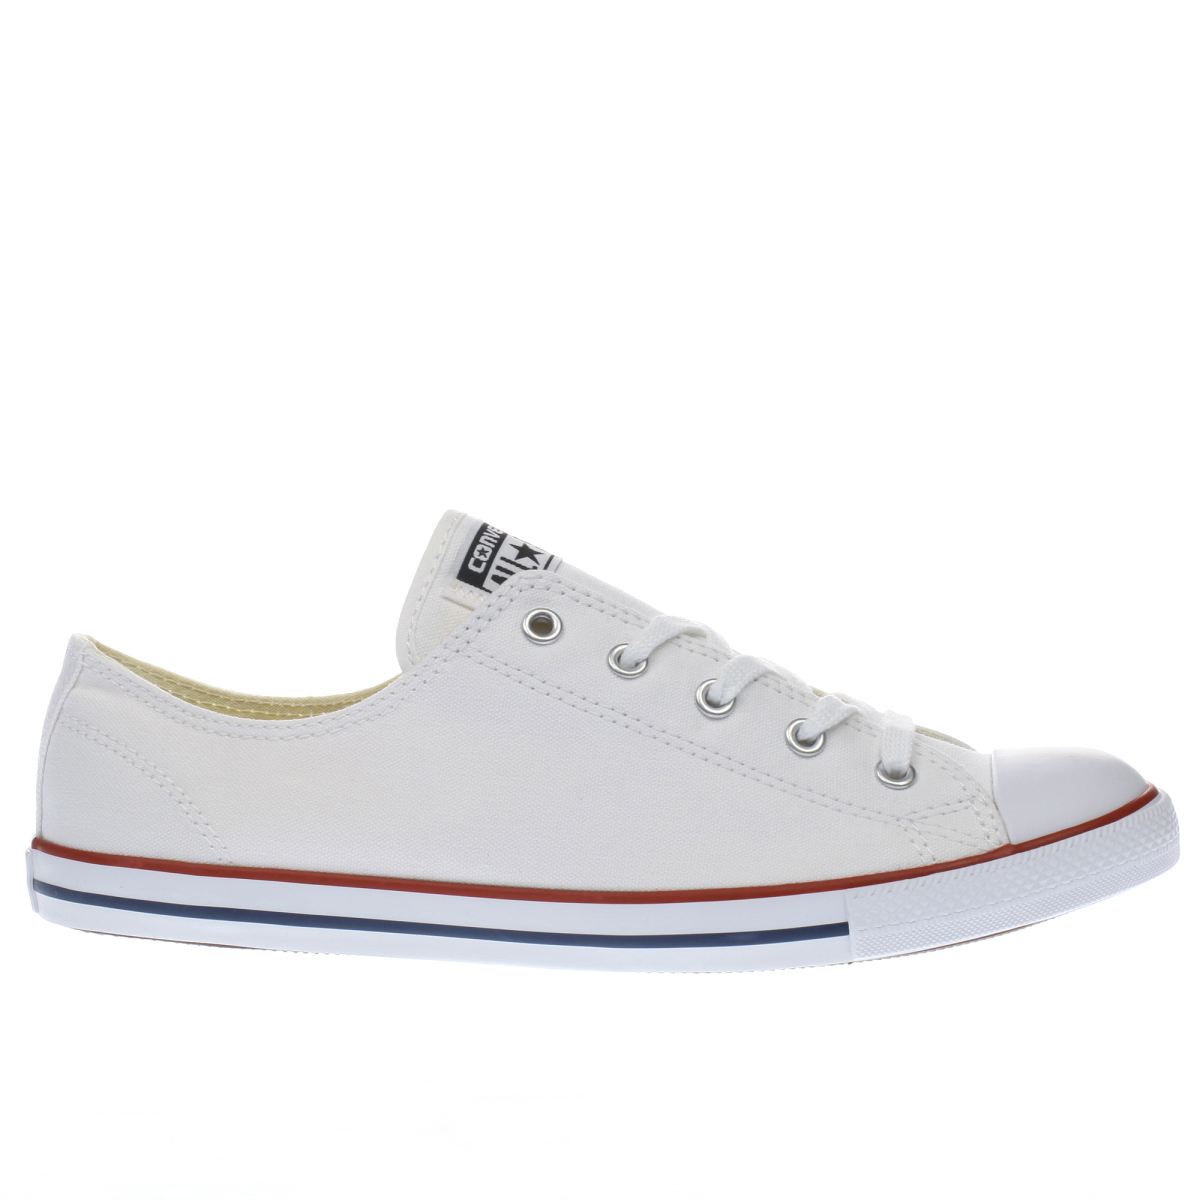 converse trainers converse white all star dainty canvas womens trainers VUYECBZ